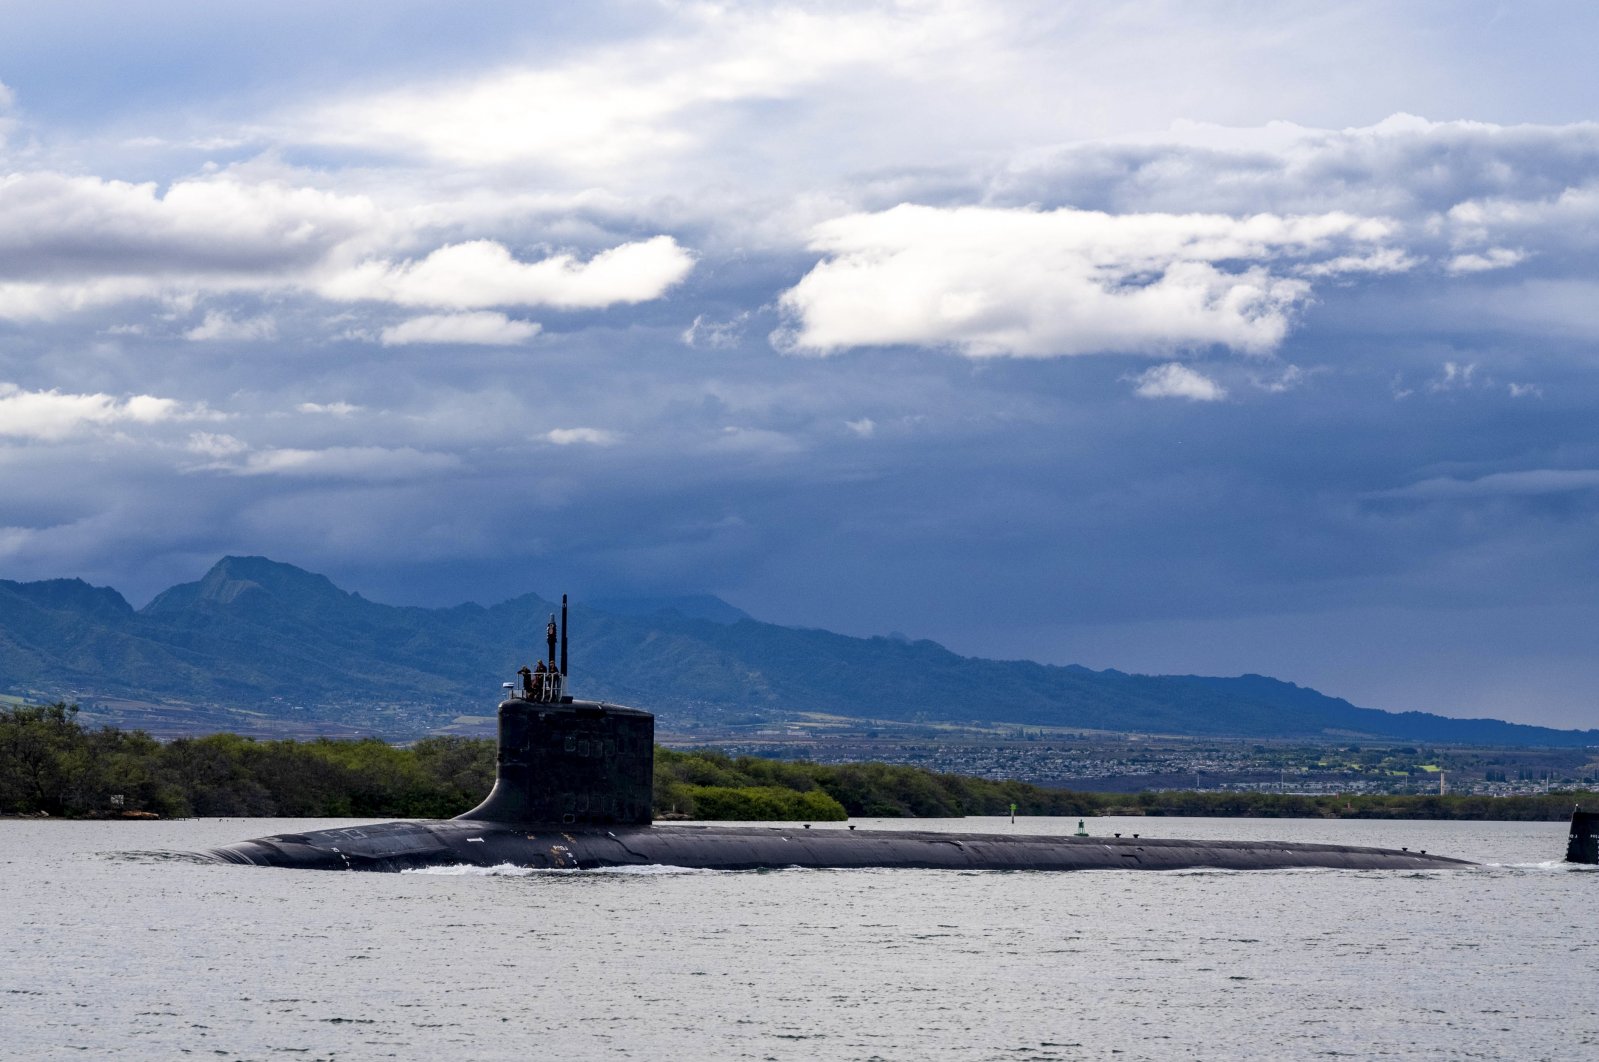 In this photo provided by U.S. Navy, the Virginia-class fast-attack submarine USS Missouri (SSN 780) departs Joint Base Pearl Harbor-Hickam for a scheduled deployment in the 7th Fleet area of responsibility, Sept. 1, 2021. (AP Photo)